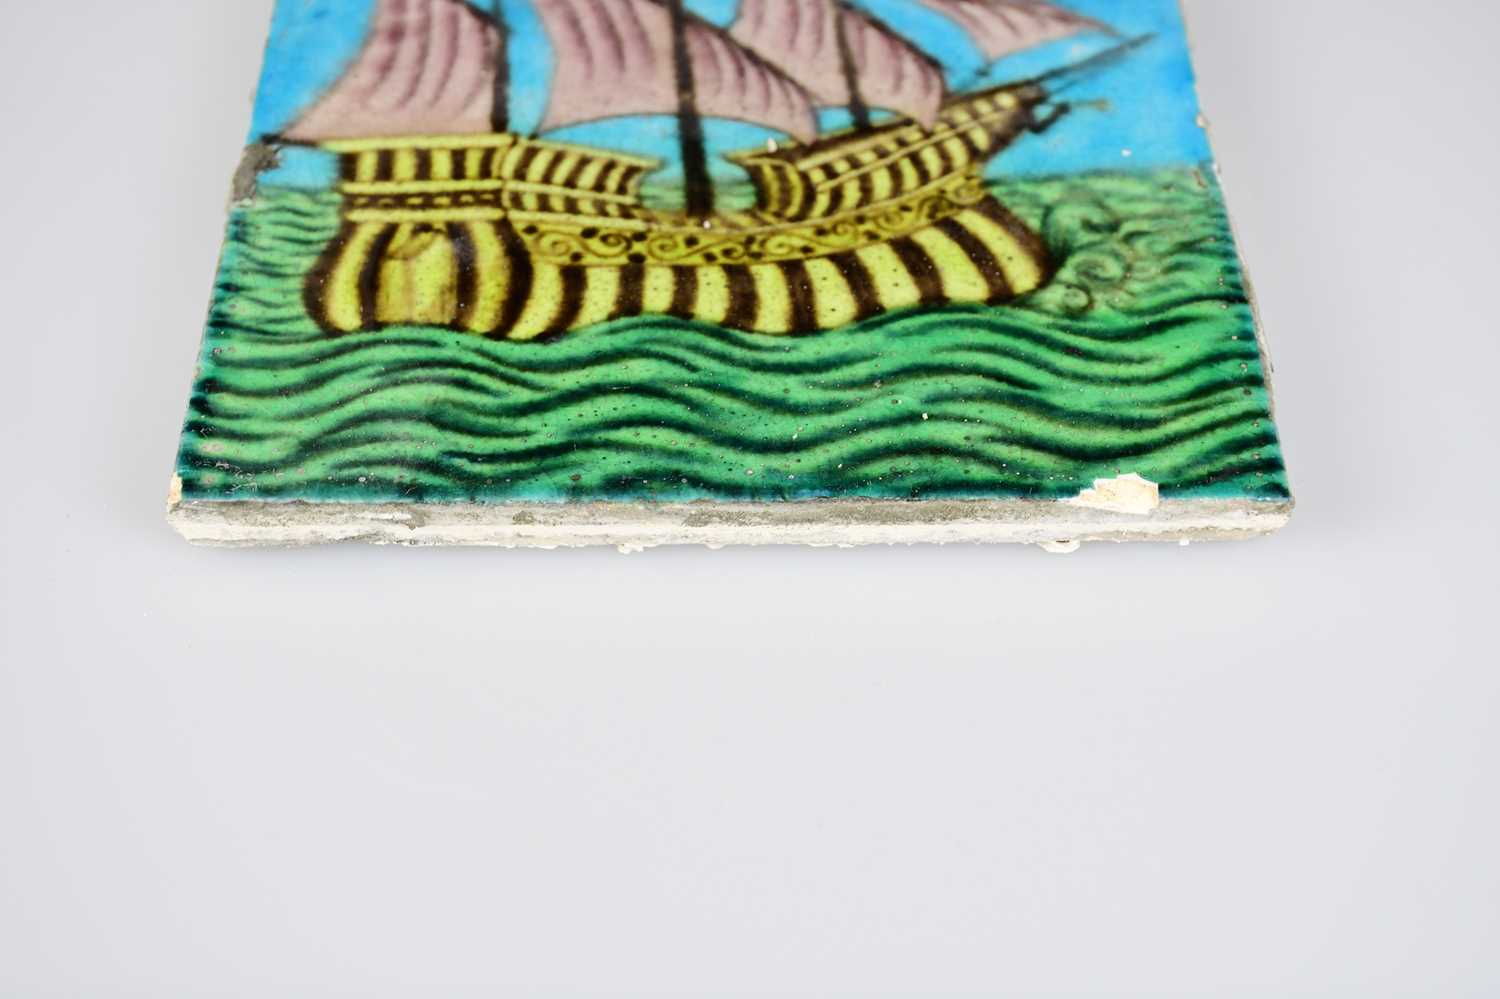 WILLIAM DE MORGAN; an Art Pottery tile painted with a four masted galleon ship, in shades of purple, - Image 3 of 6